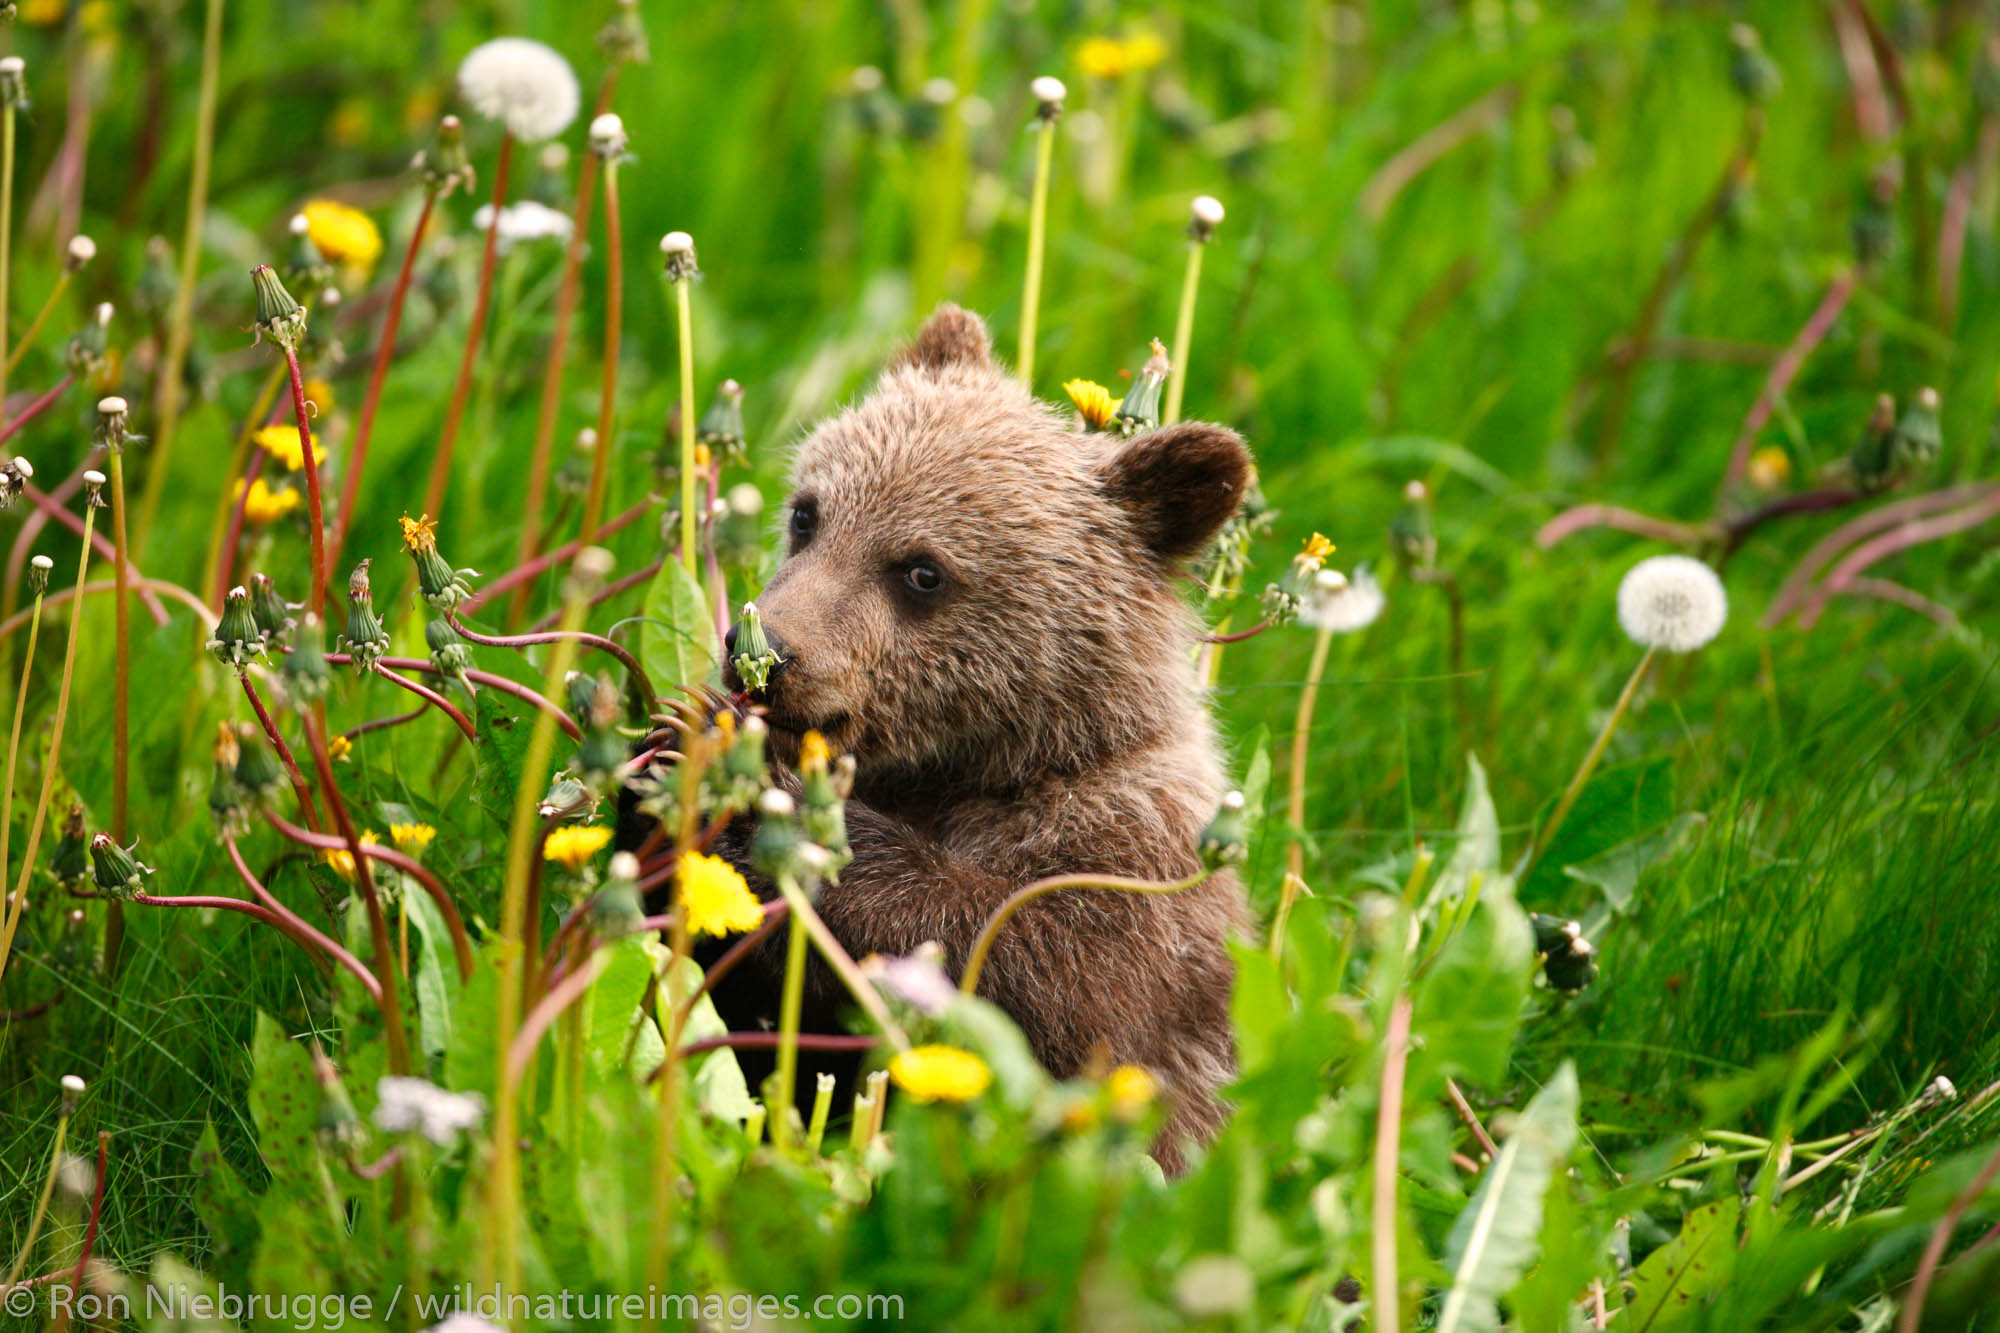 Grizzly Bear cub along the Haines Highway, at the border between British Columbia and the Yukon Territory, Canada.